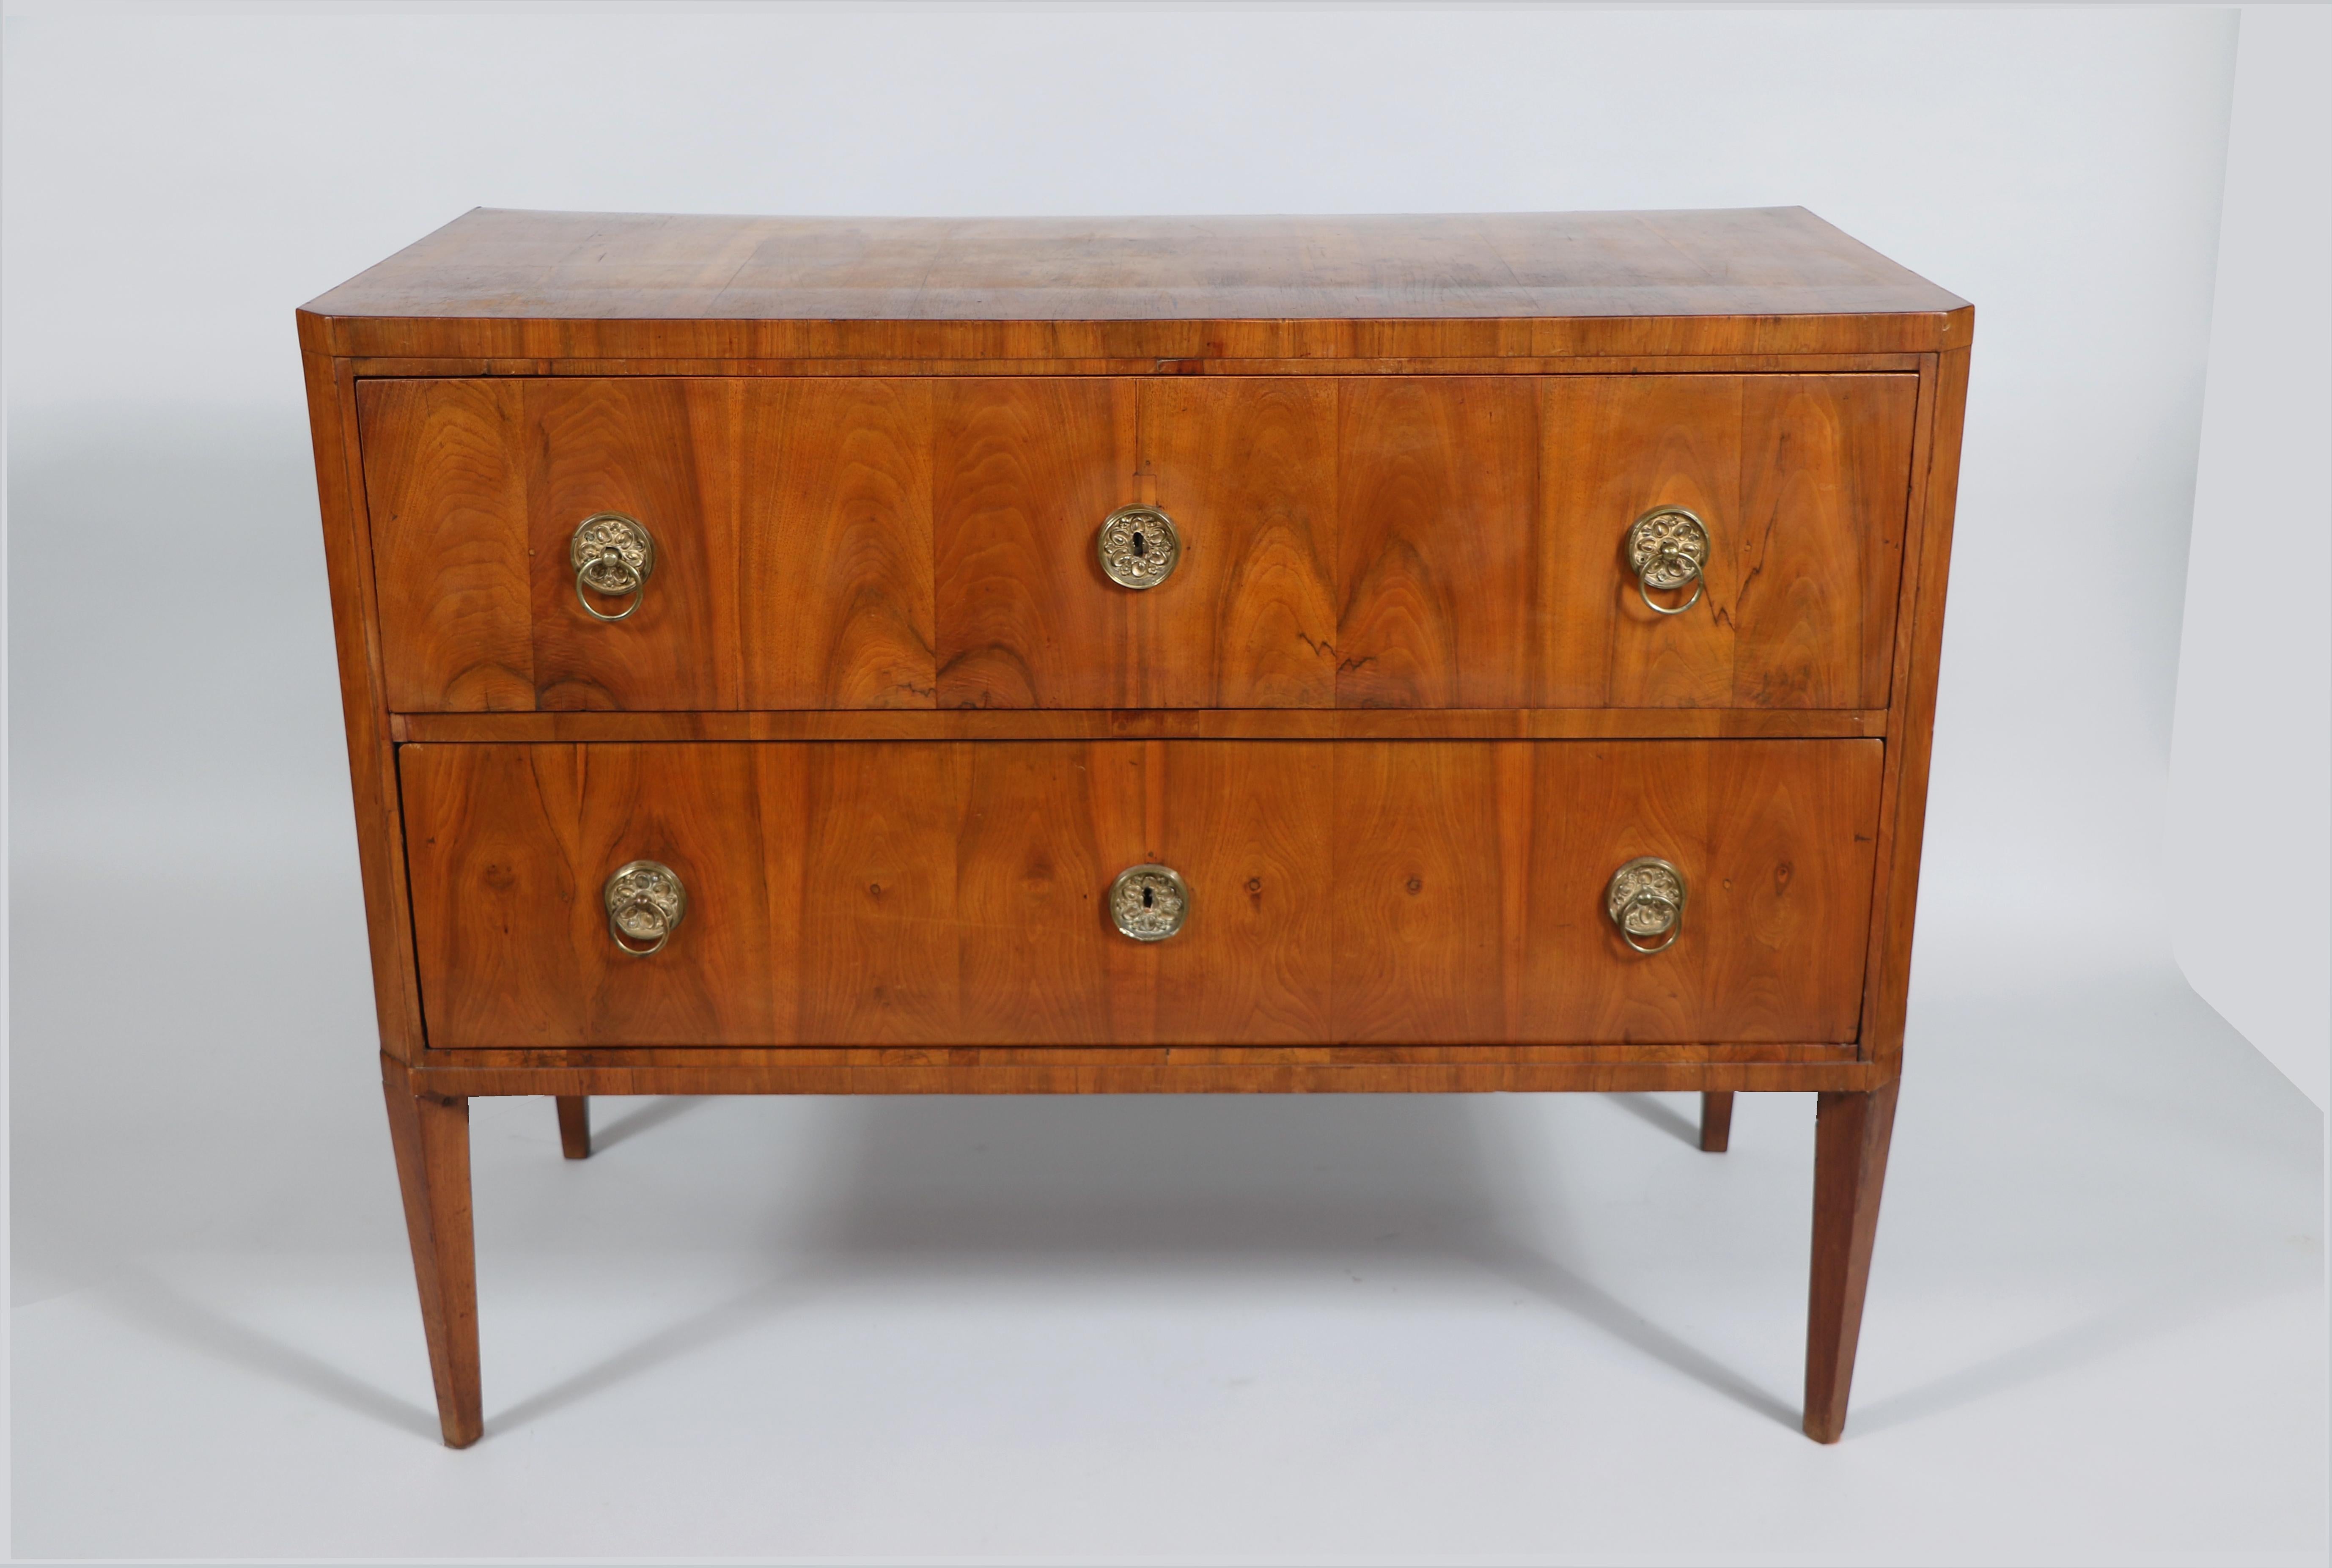 Hello,
This elegant early Biedermeier walnut bureau-commode is the best example of top-quality Viennese piece from circa 1820-25.

Viennese Biedermeier is distinguished by their sophisticated proportions, rare and refined design and excellent